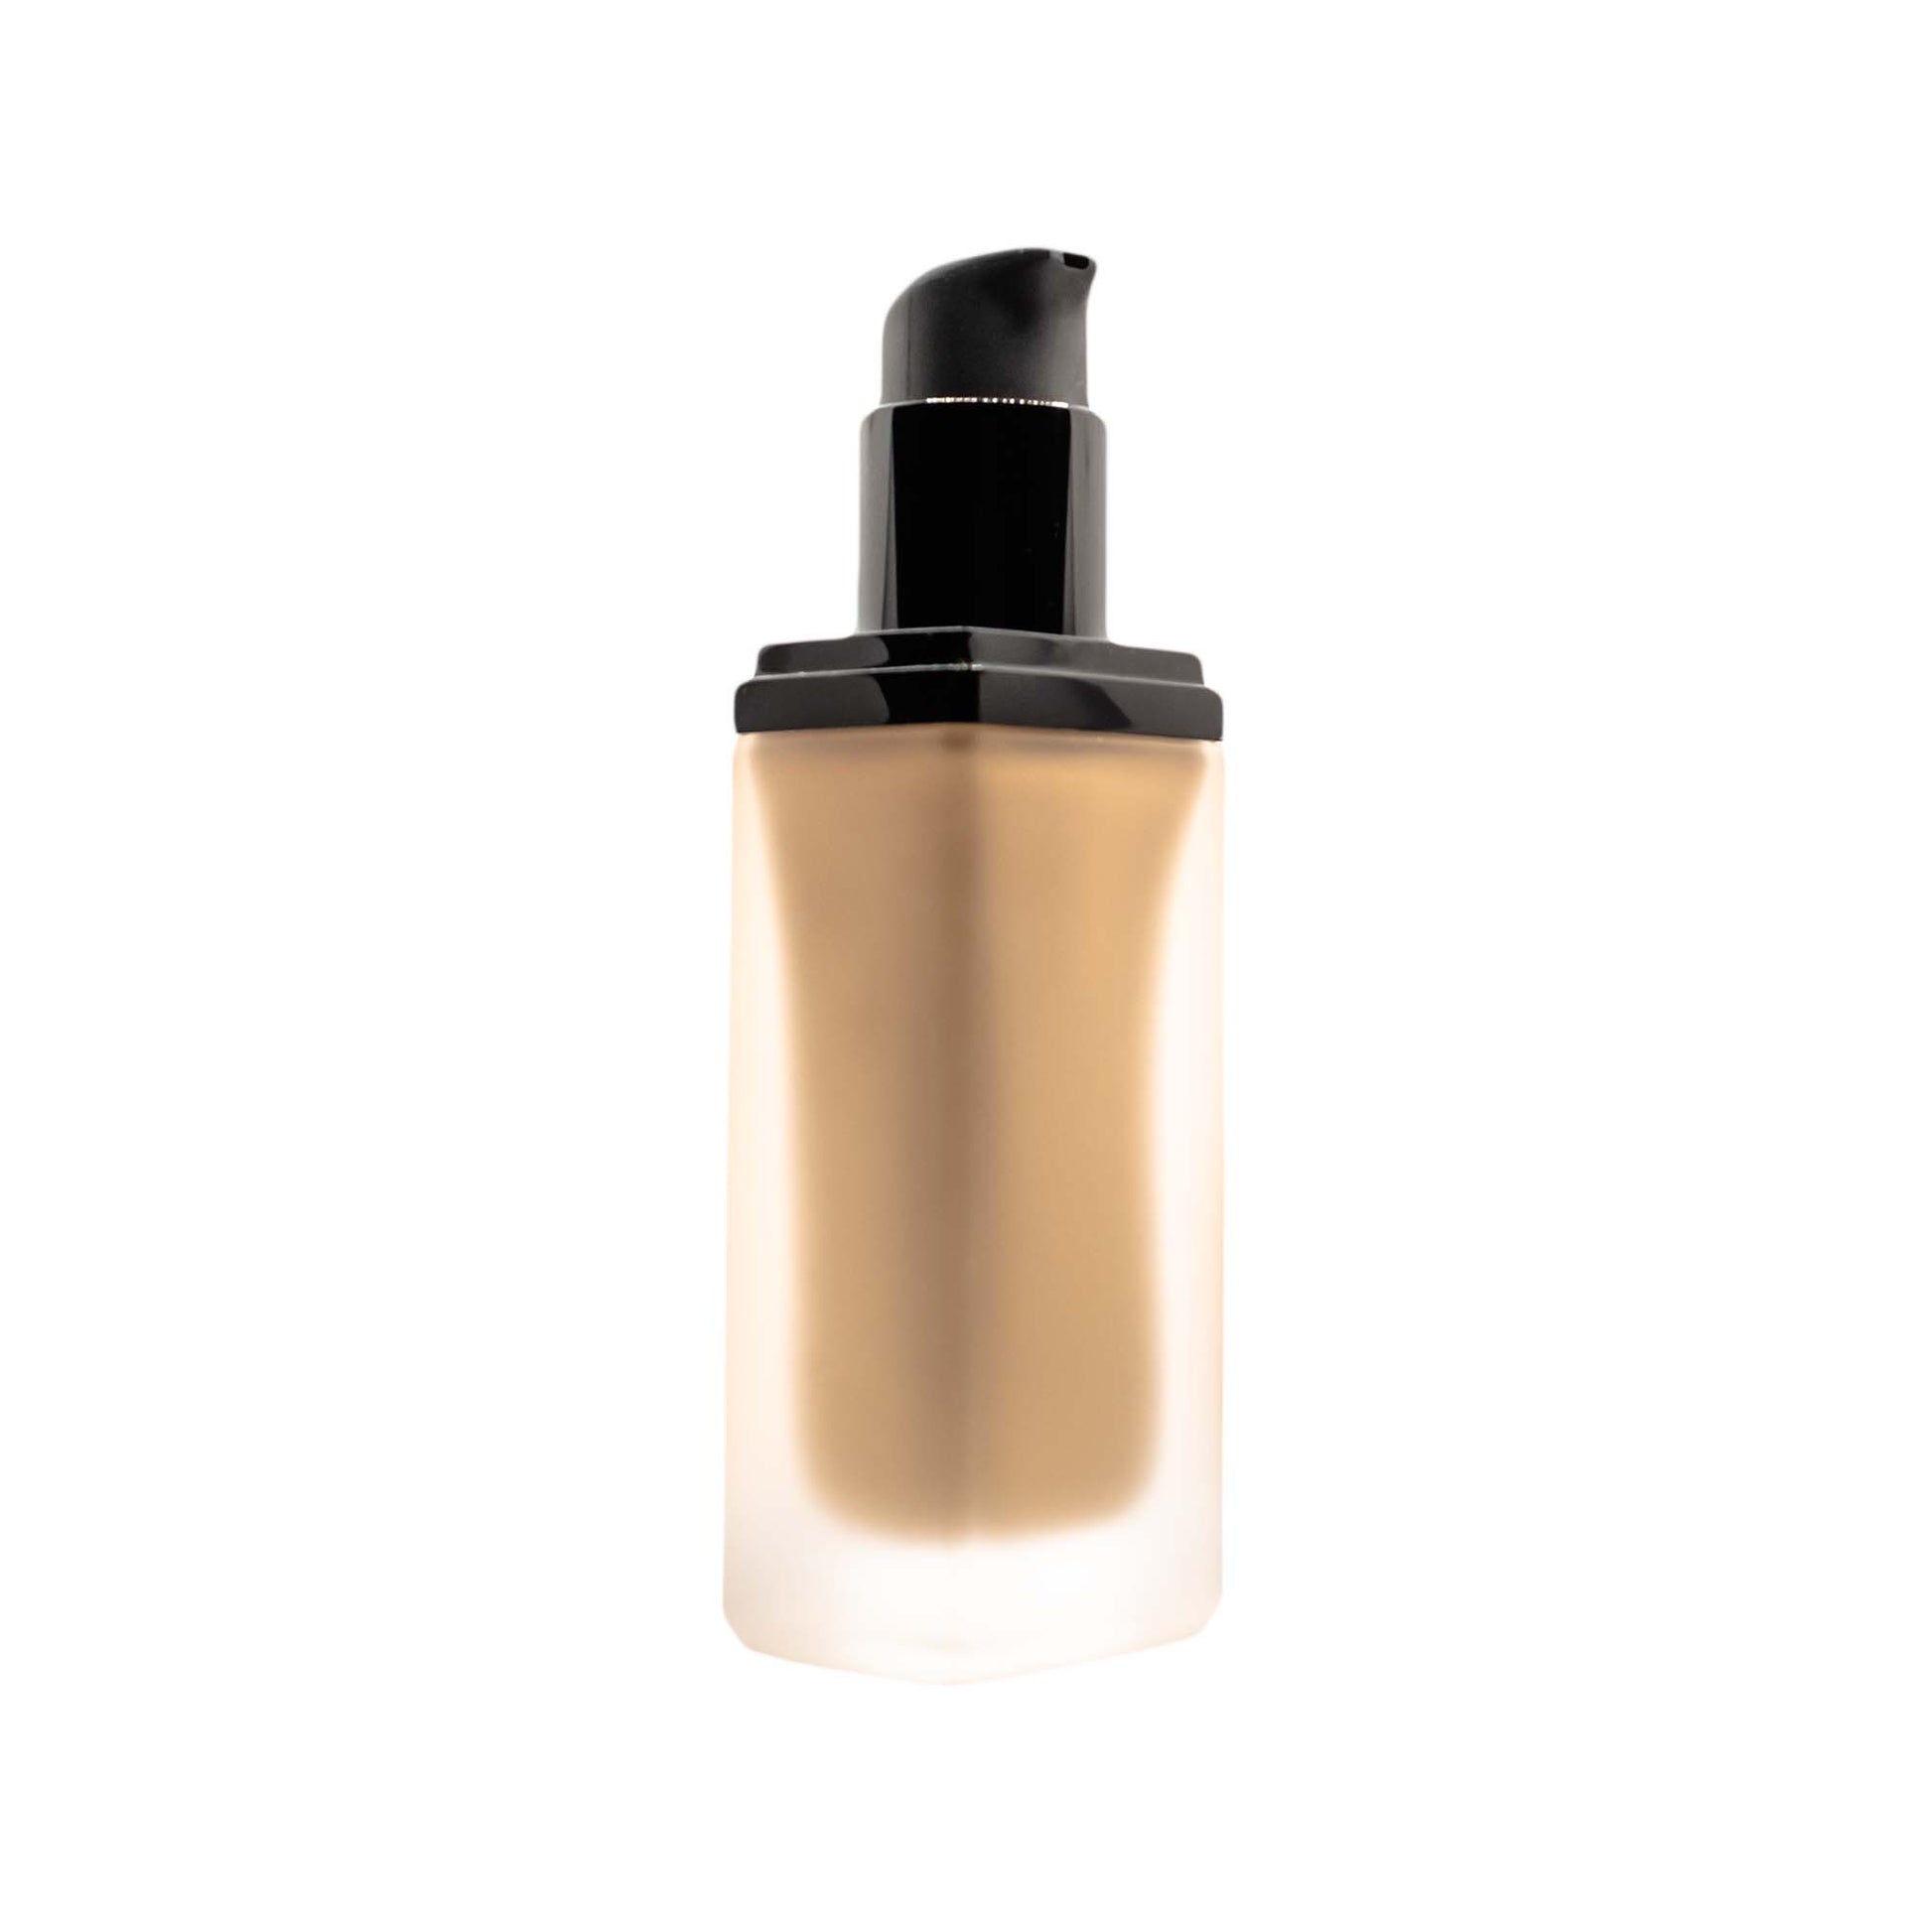 Get porcelain skin with Cruisin Organics Translucent Foundation. Protects from elements, offers lighter pink or yellow undertones. Provides blemish-free, even-toned, and youthful look.